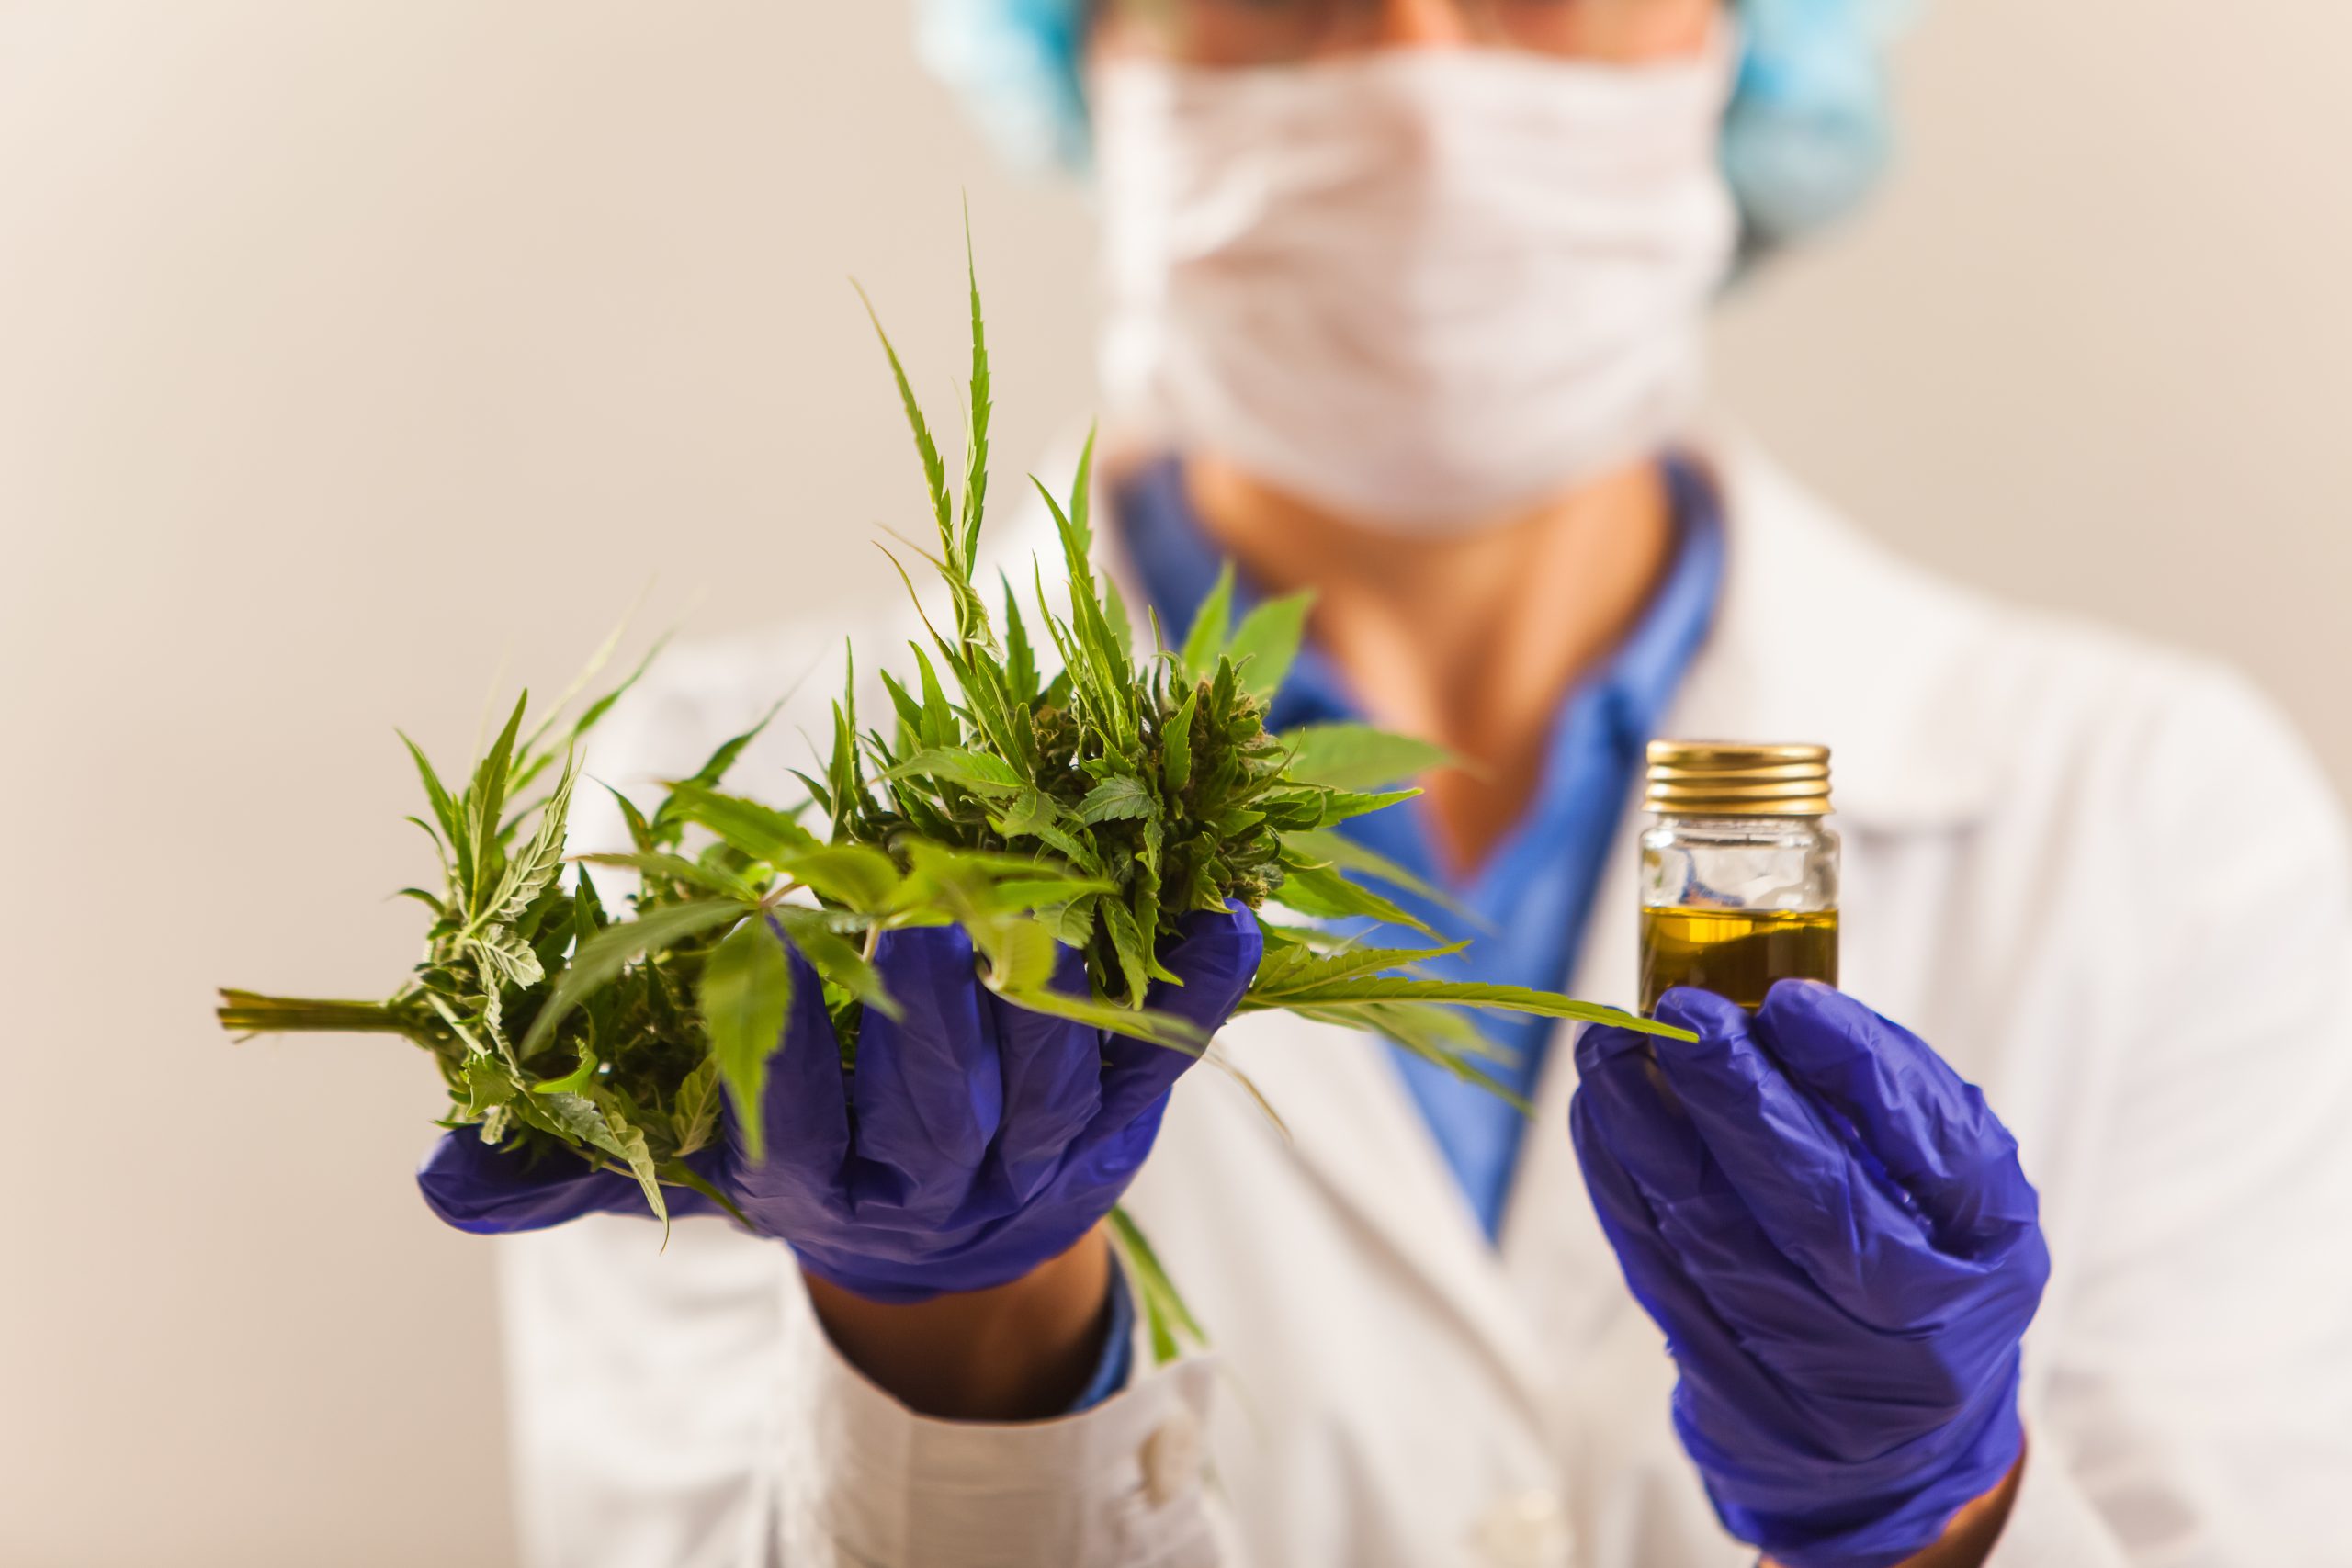 Scientist holding cannabis plant and cannabis extract with gloves. 